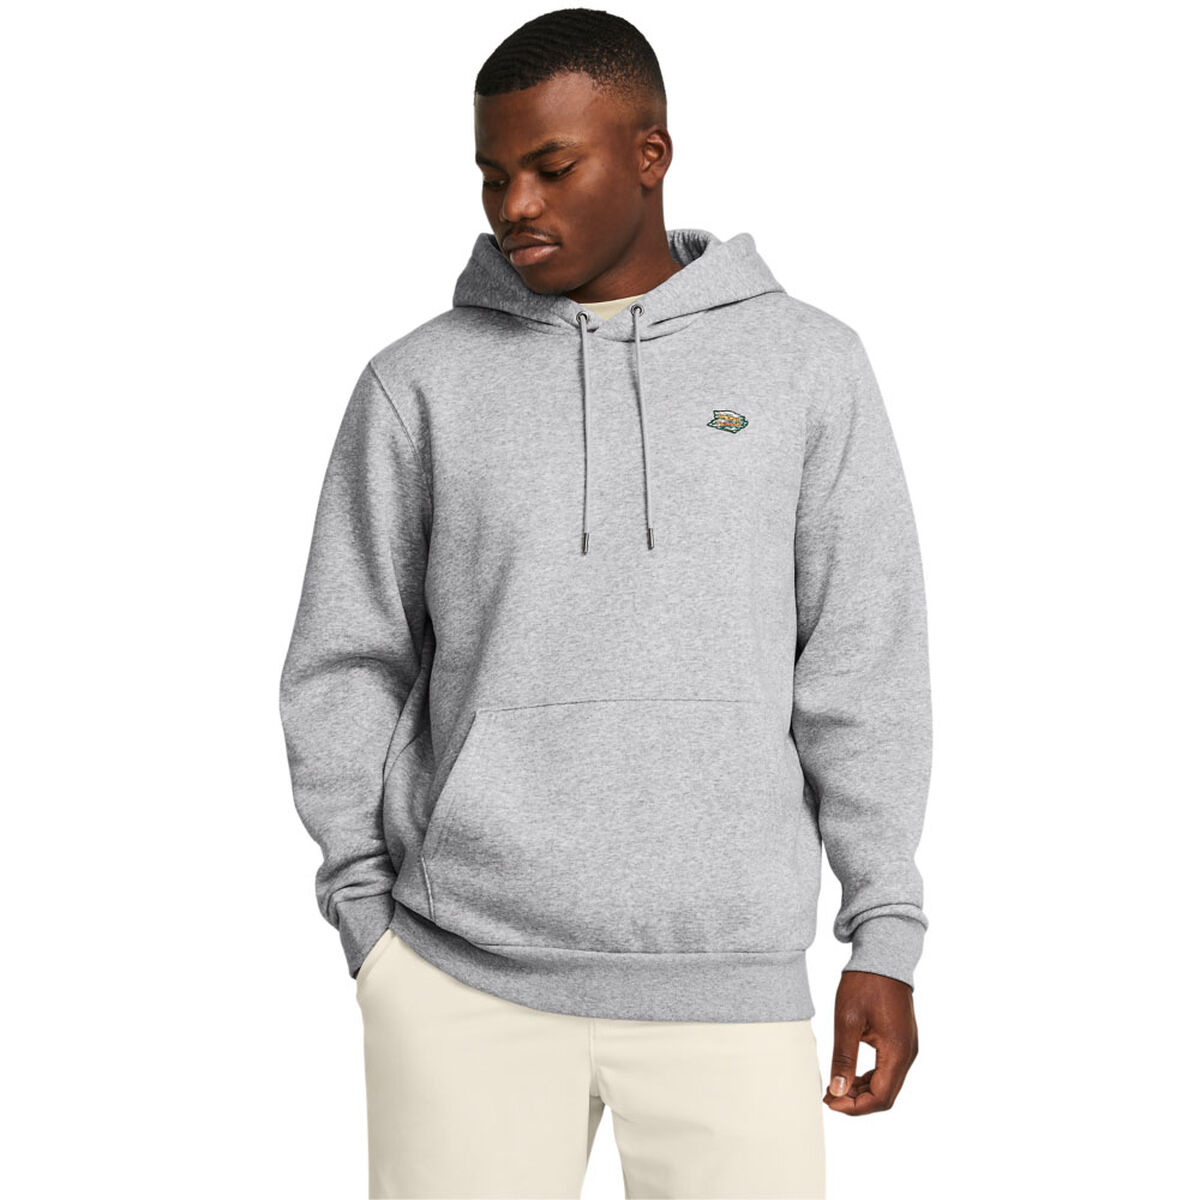 Under Armour Men’s Icon Fleece Limited Edition Golf Hoodie, Mens, Mod gray/light heather/black, Large | American Golf